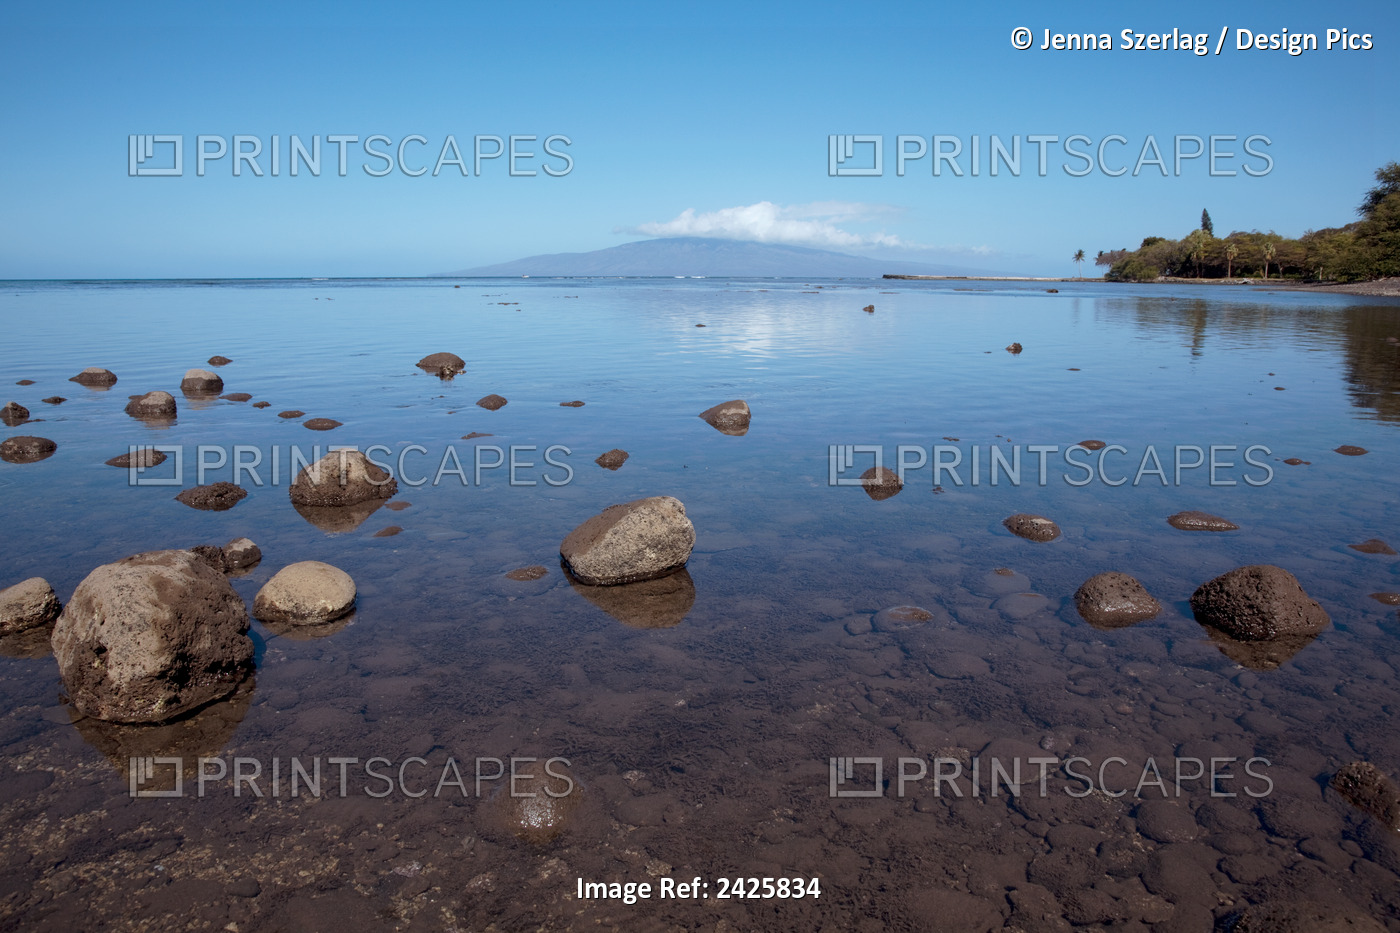 Hawaii, Maui, A Close Up View Of Rocks And Reflections At Low Tide